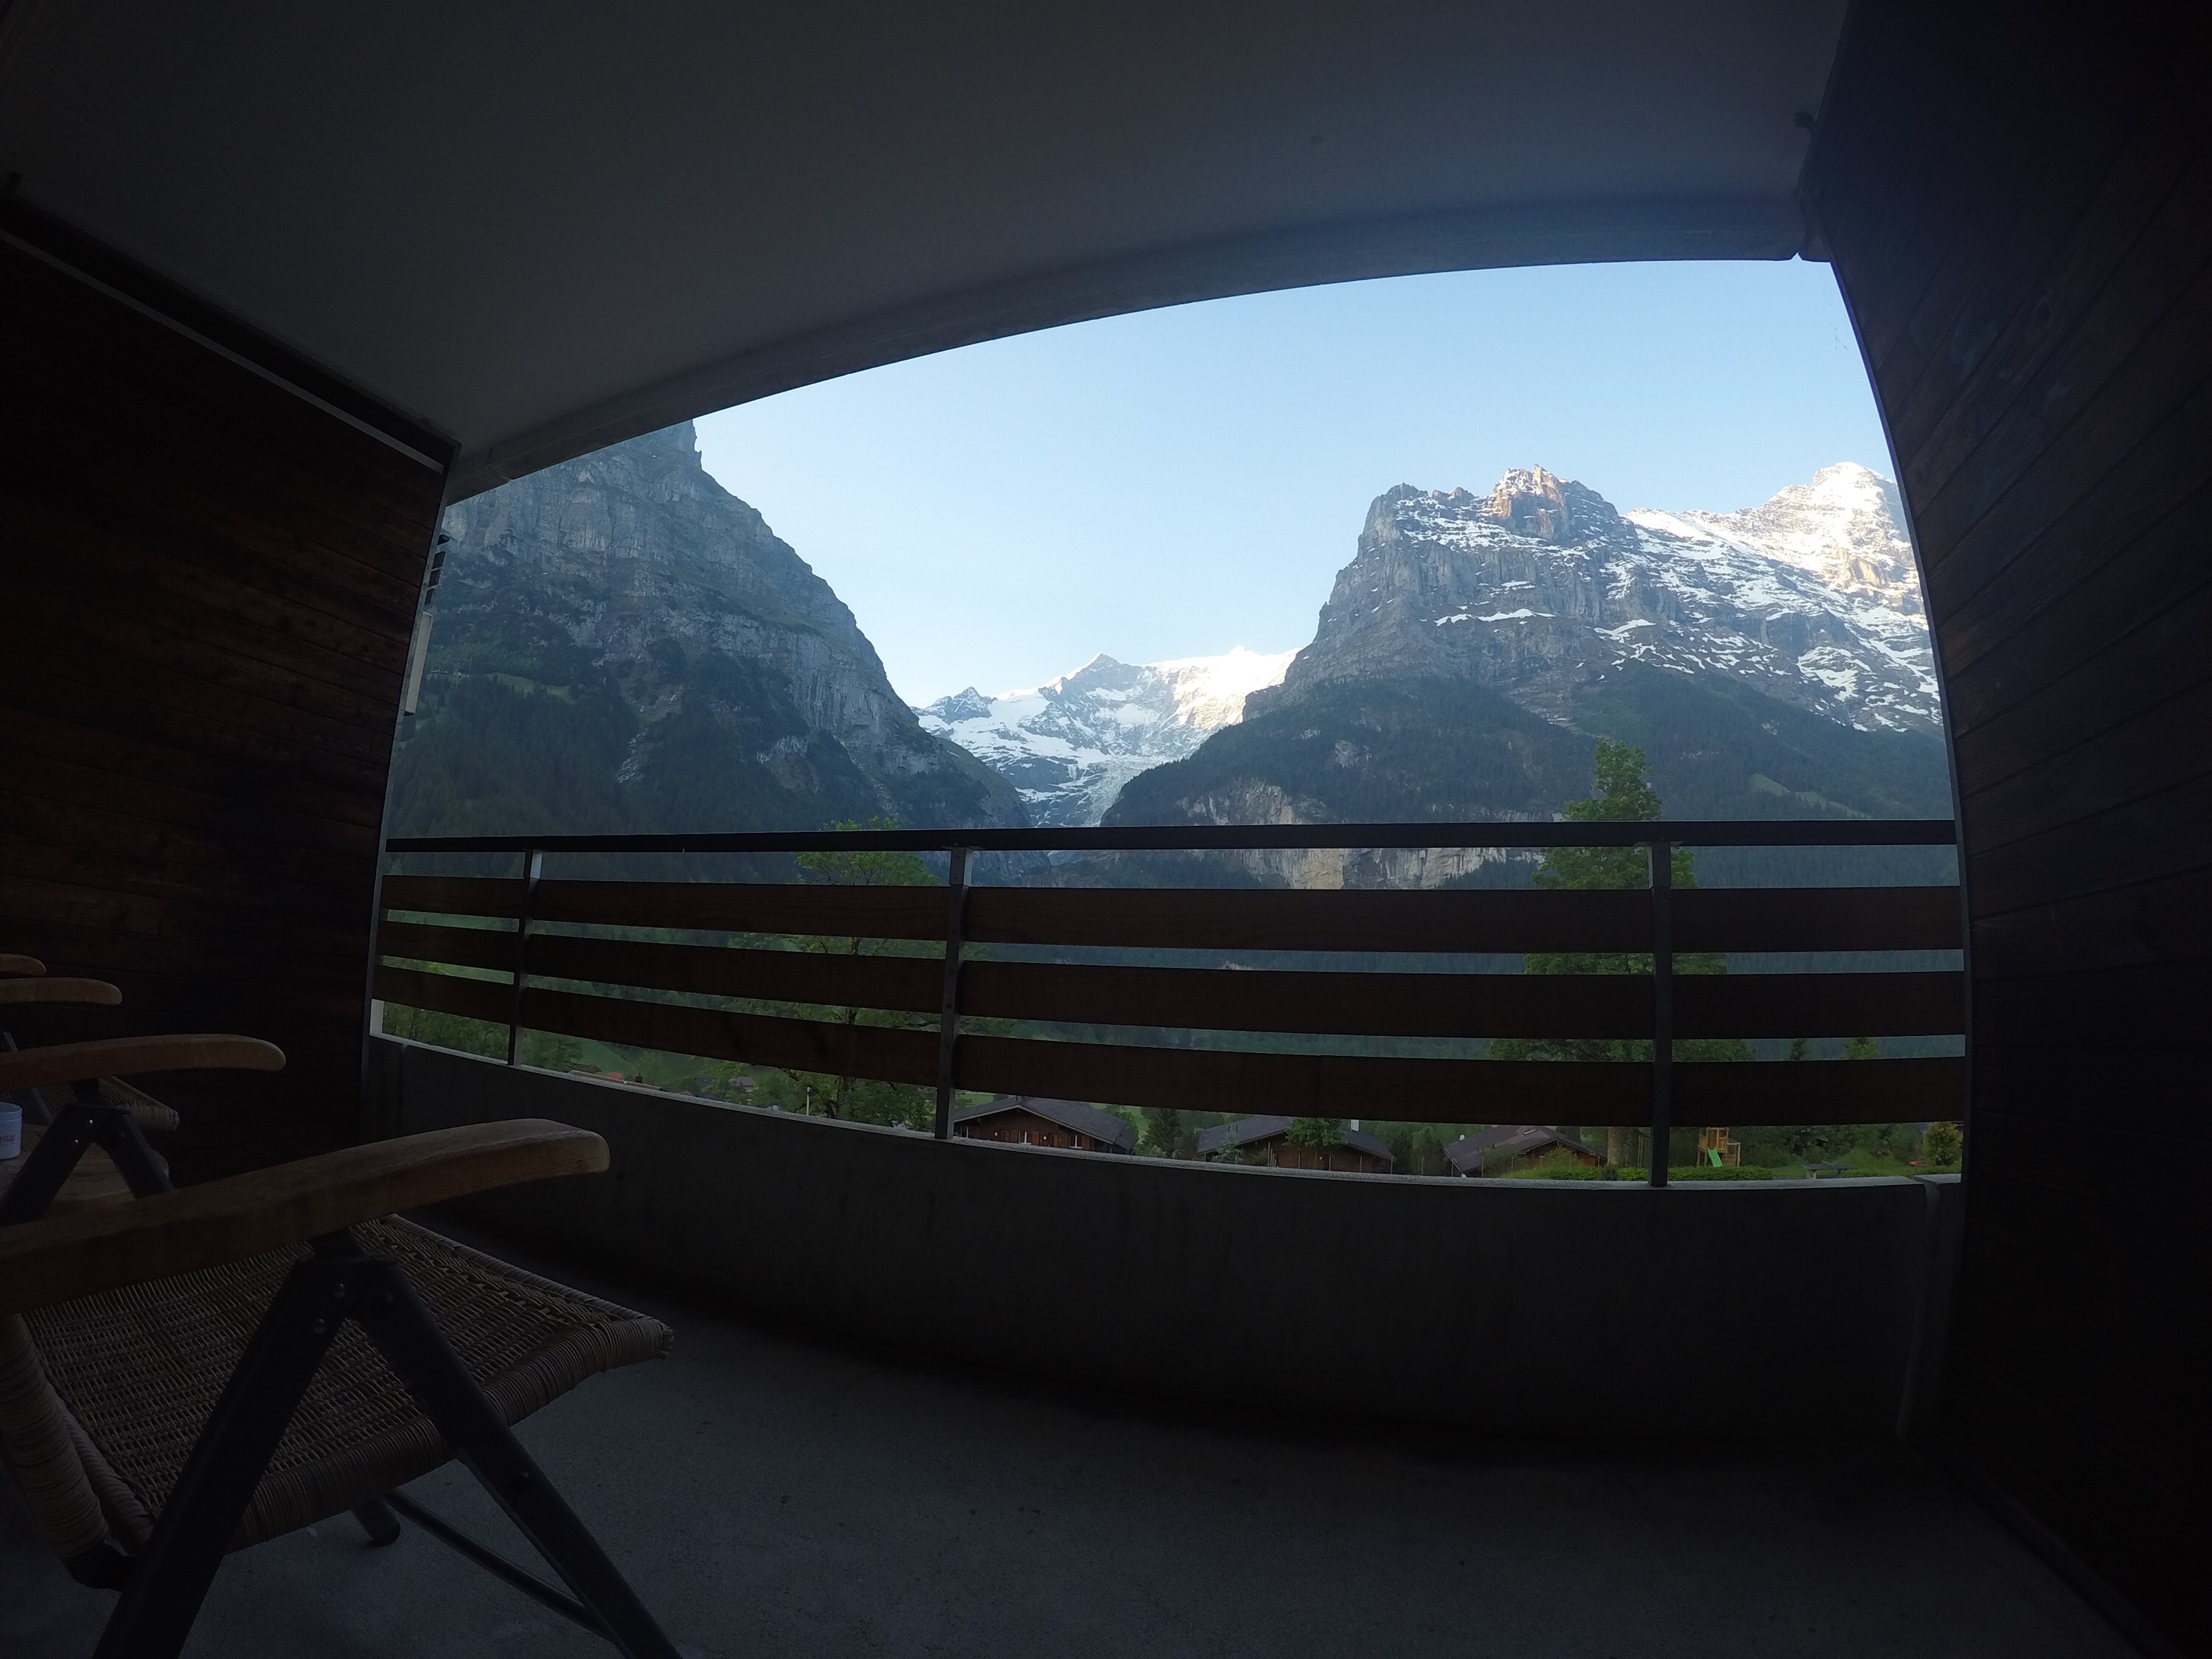 Room is awesome with view of the Alps!!!